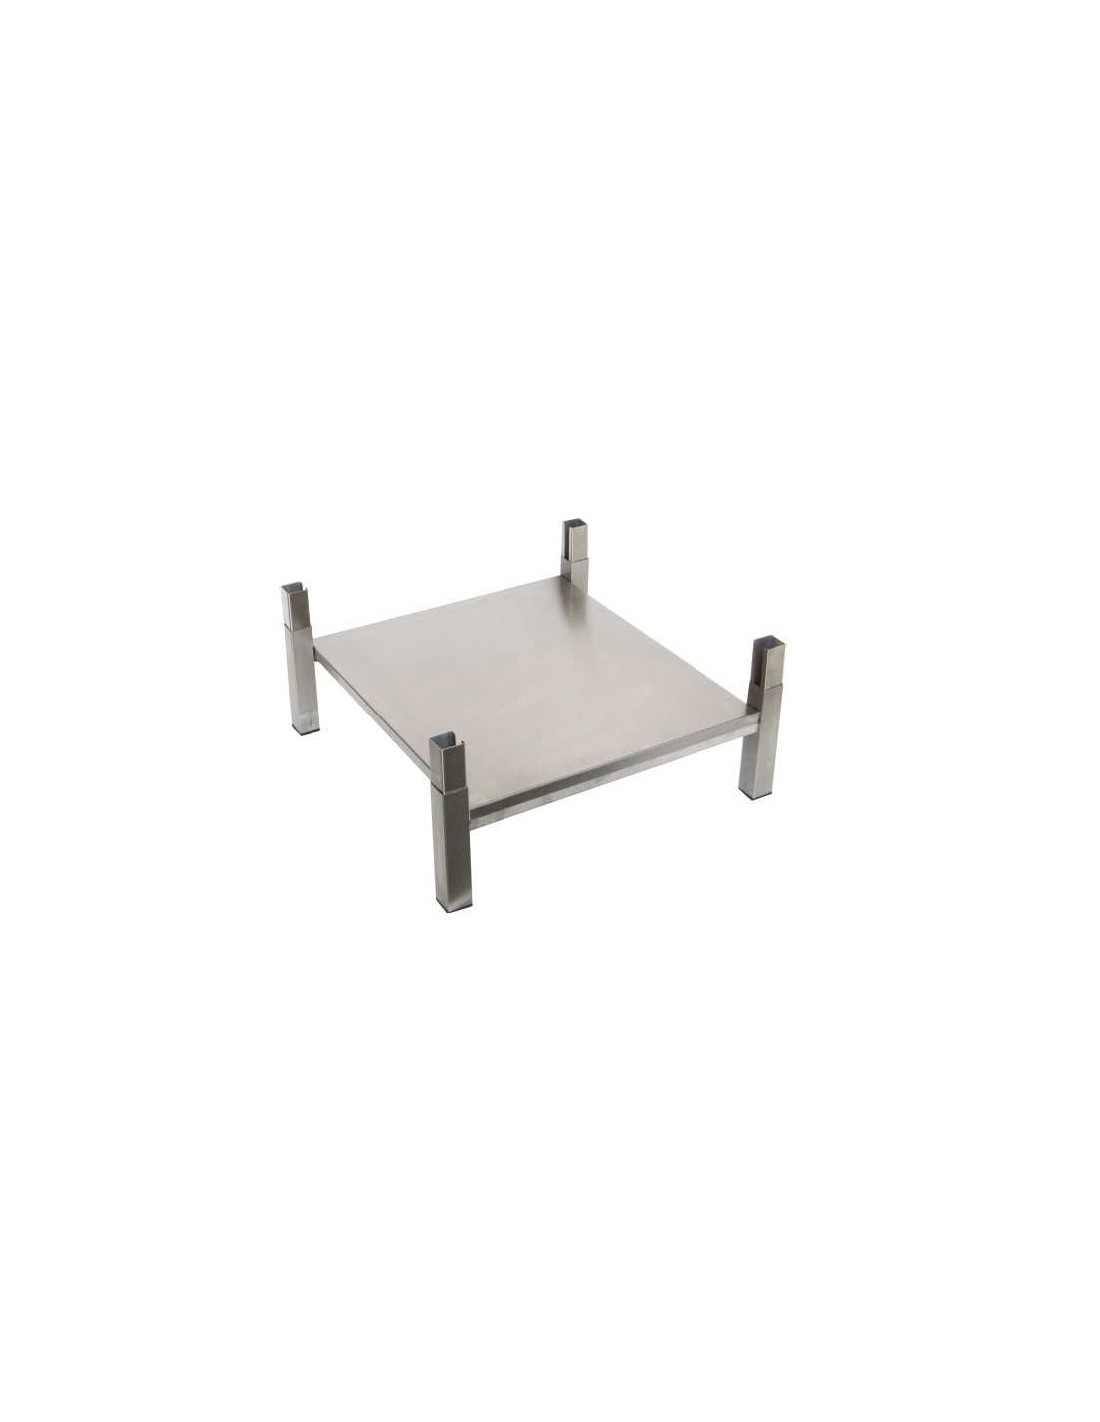 Support with shelf - cm 60 x 60 x 20 h